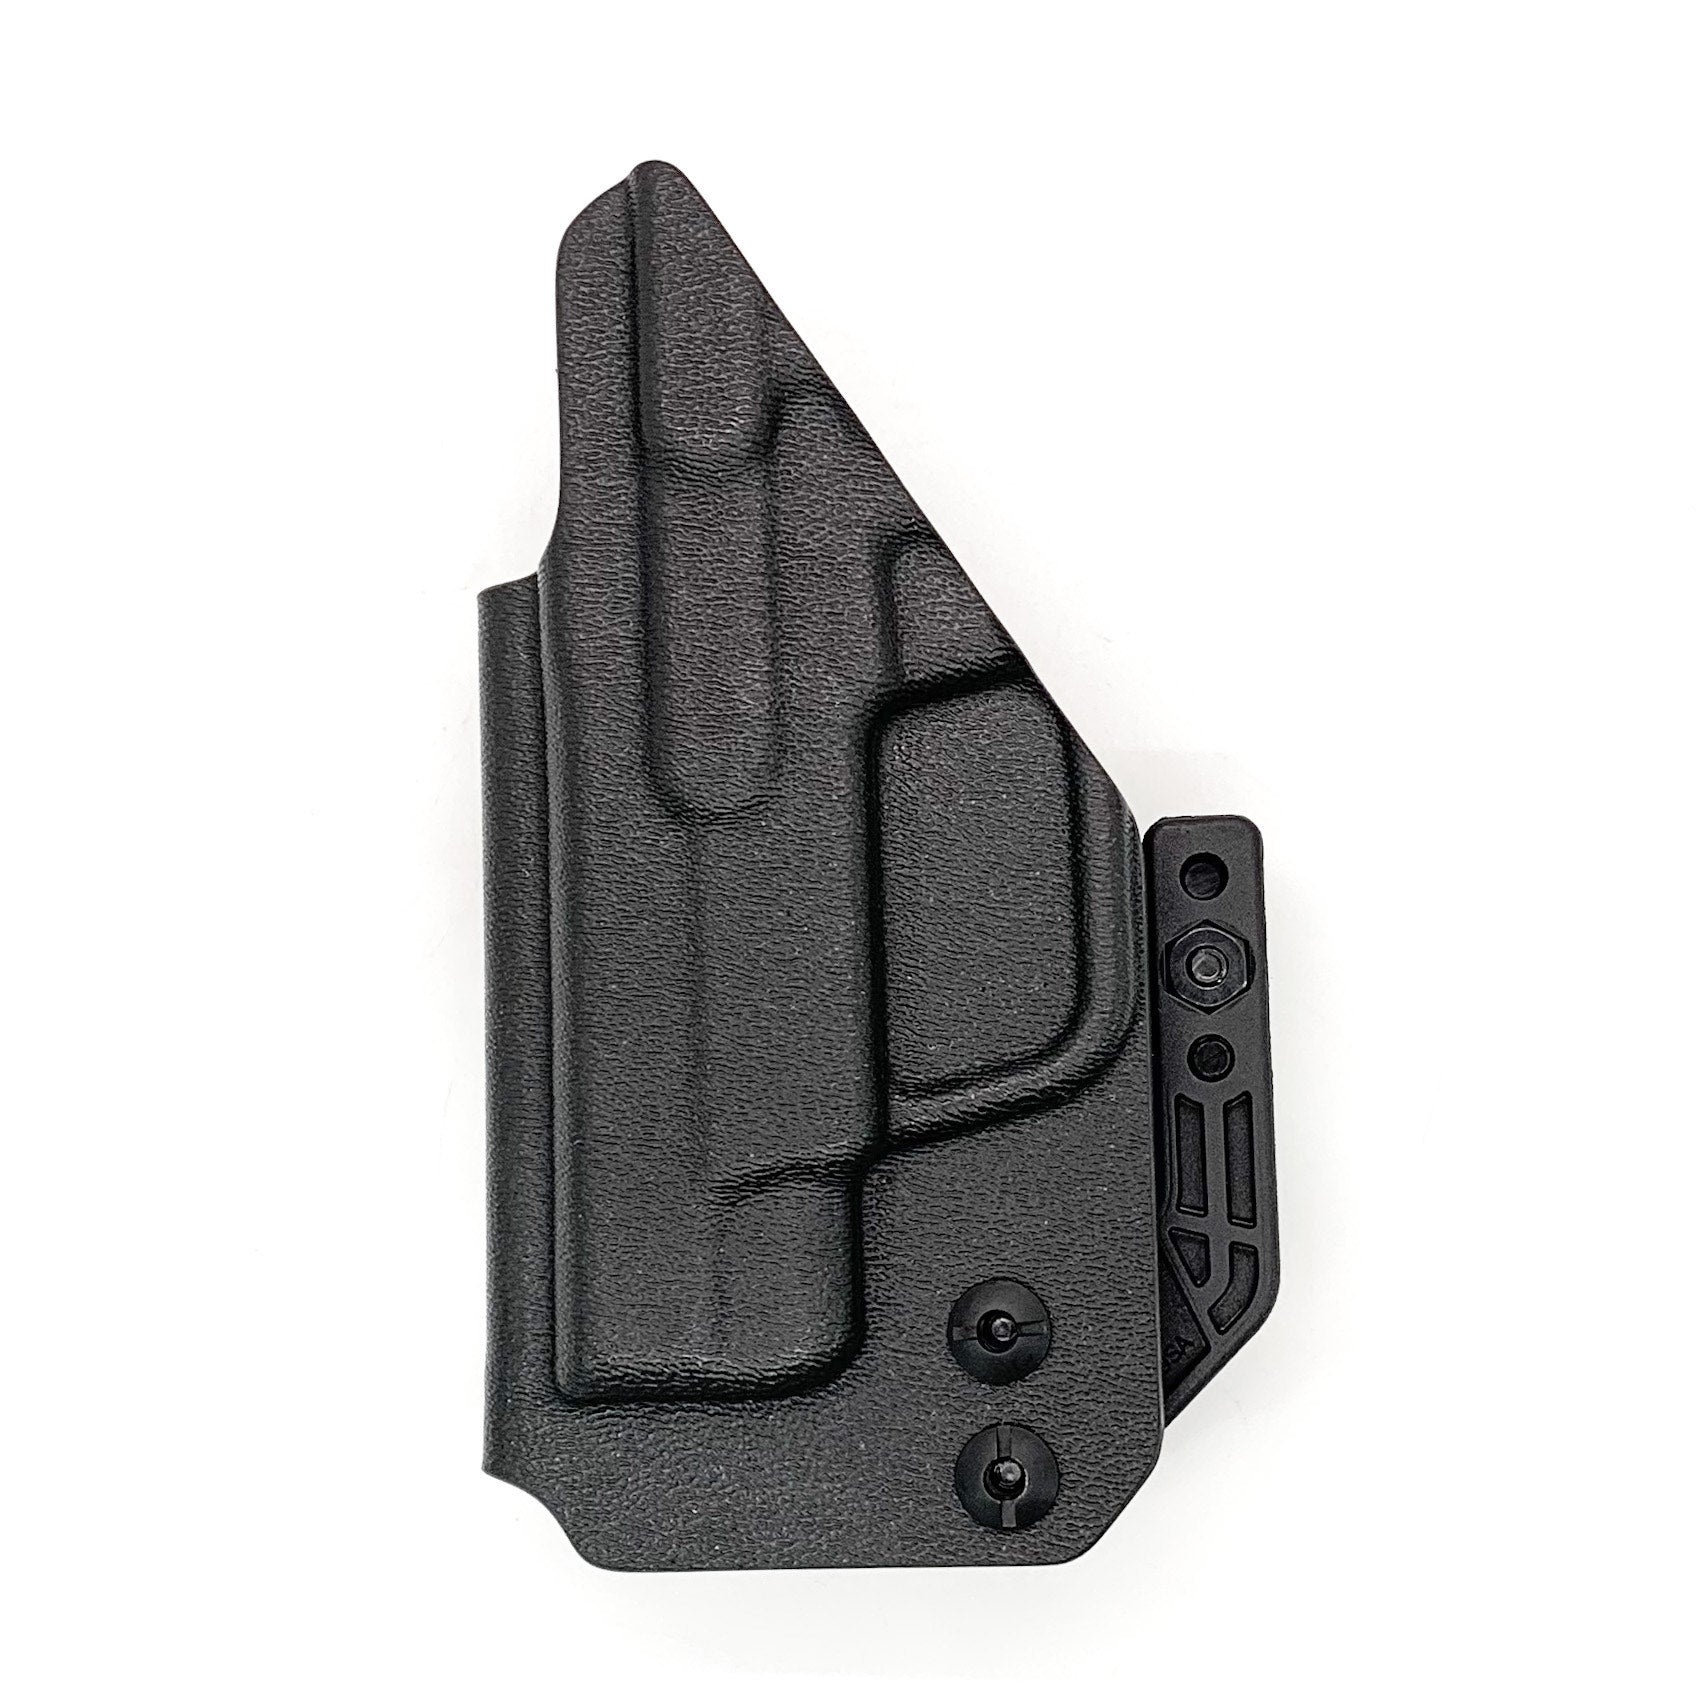 Inside waistband holster designed for the Ruger LCP II pistol Our holsters are vacuum formed with a precision machined mold designed from a CAD model of the actual firearm. Each holster is formed, trimmed, and folded in-house. Final fit and function tests are done with the actual pistol to ensure the holster fits the gun and has the correct amount of retention. The holster's retention is easily adjusted so that the fit can be dialed into your personal preference